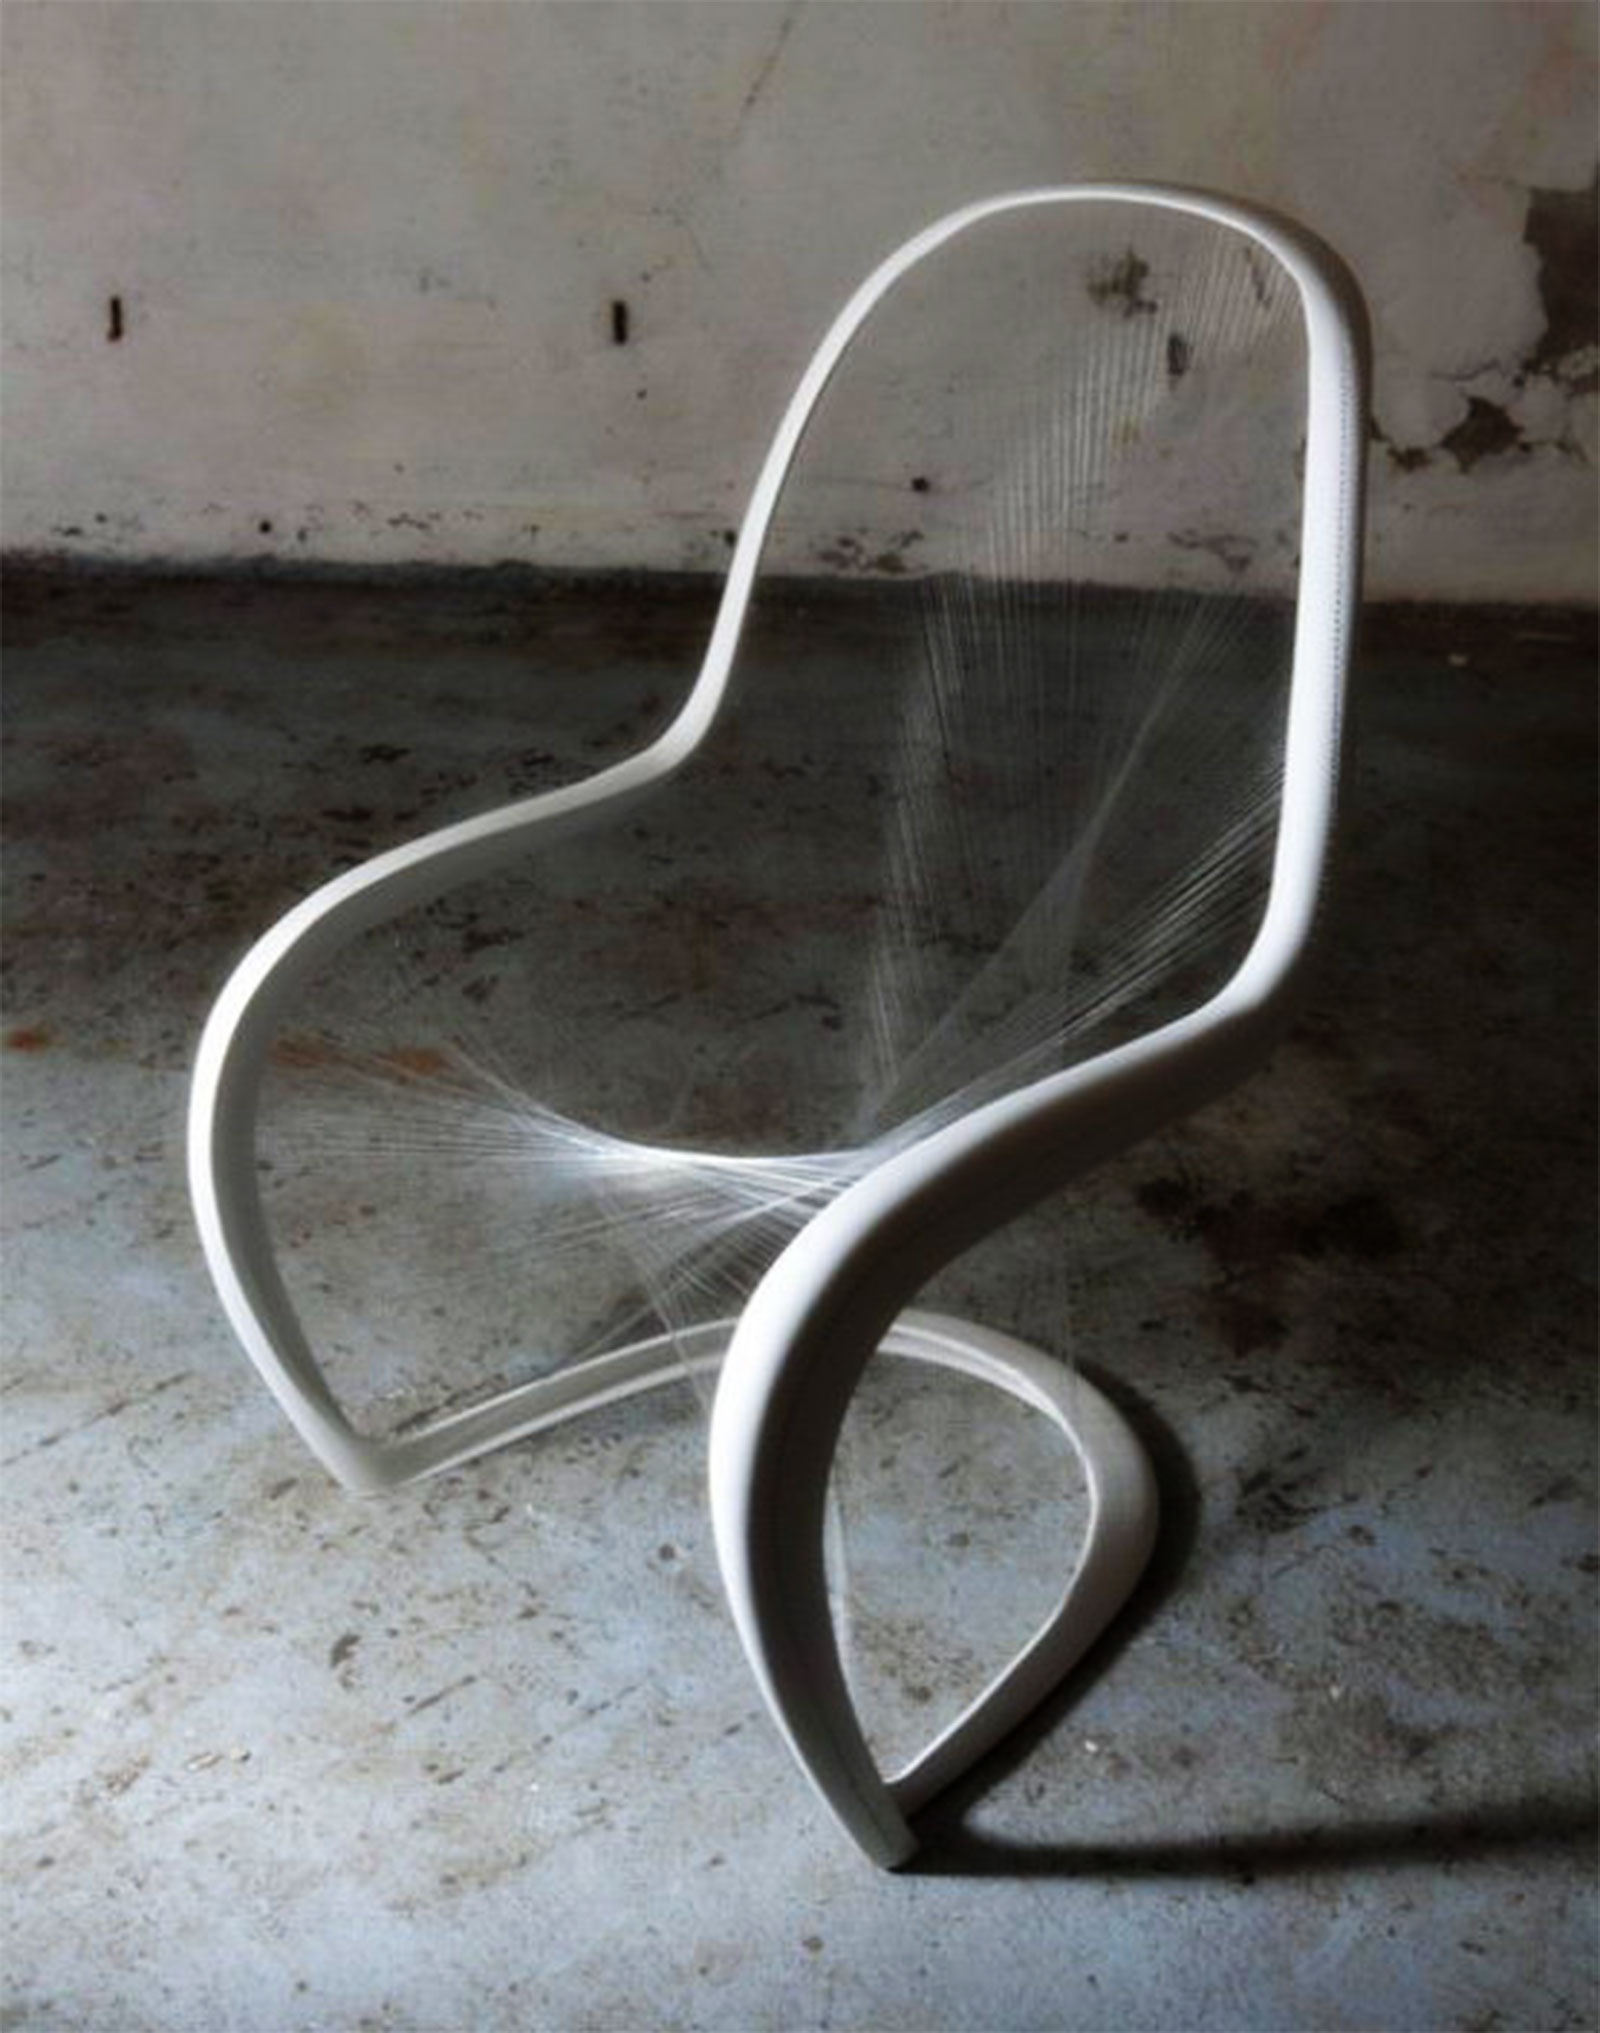 https://foter.com/photos/title/unusual-chairs.jpg